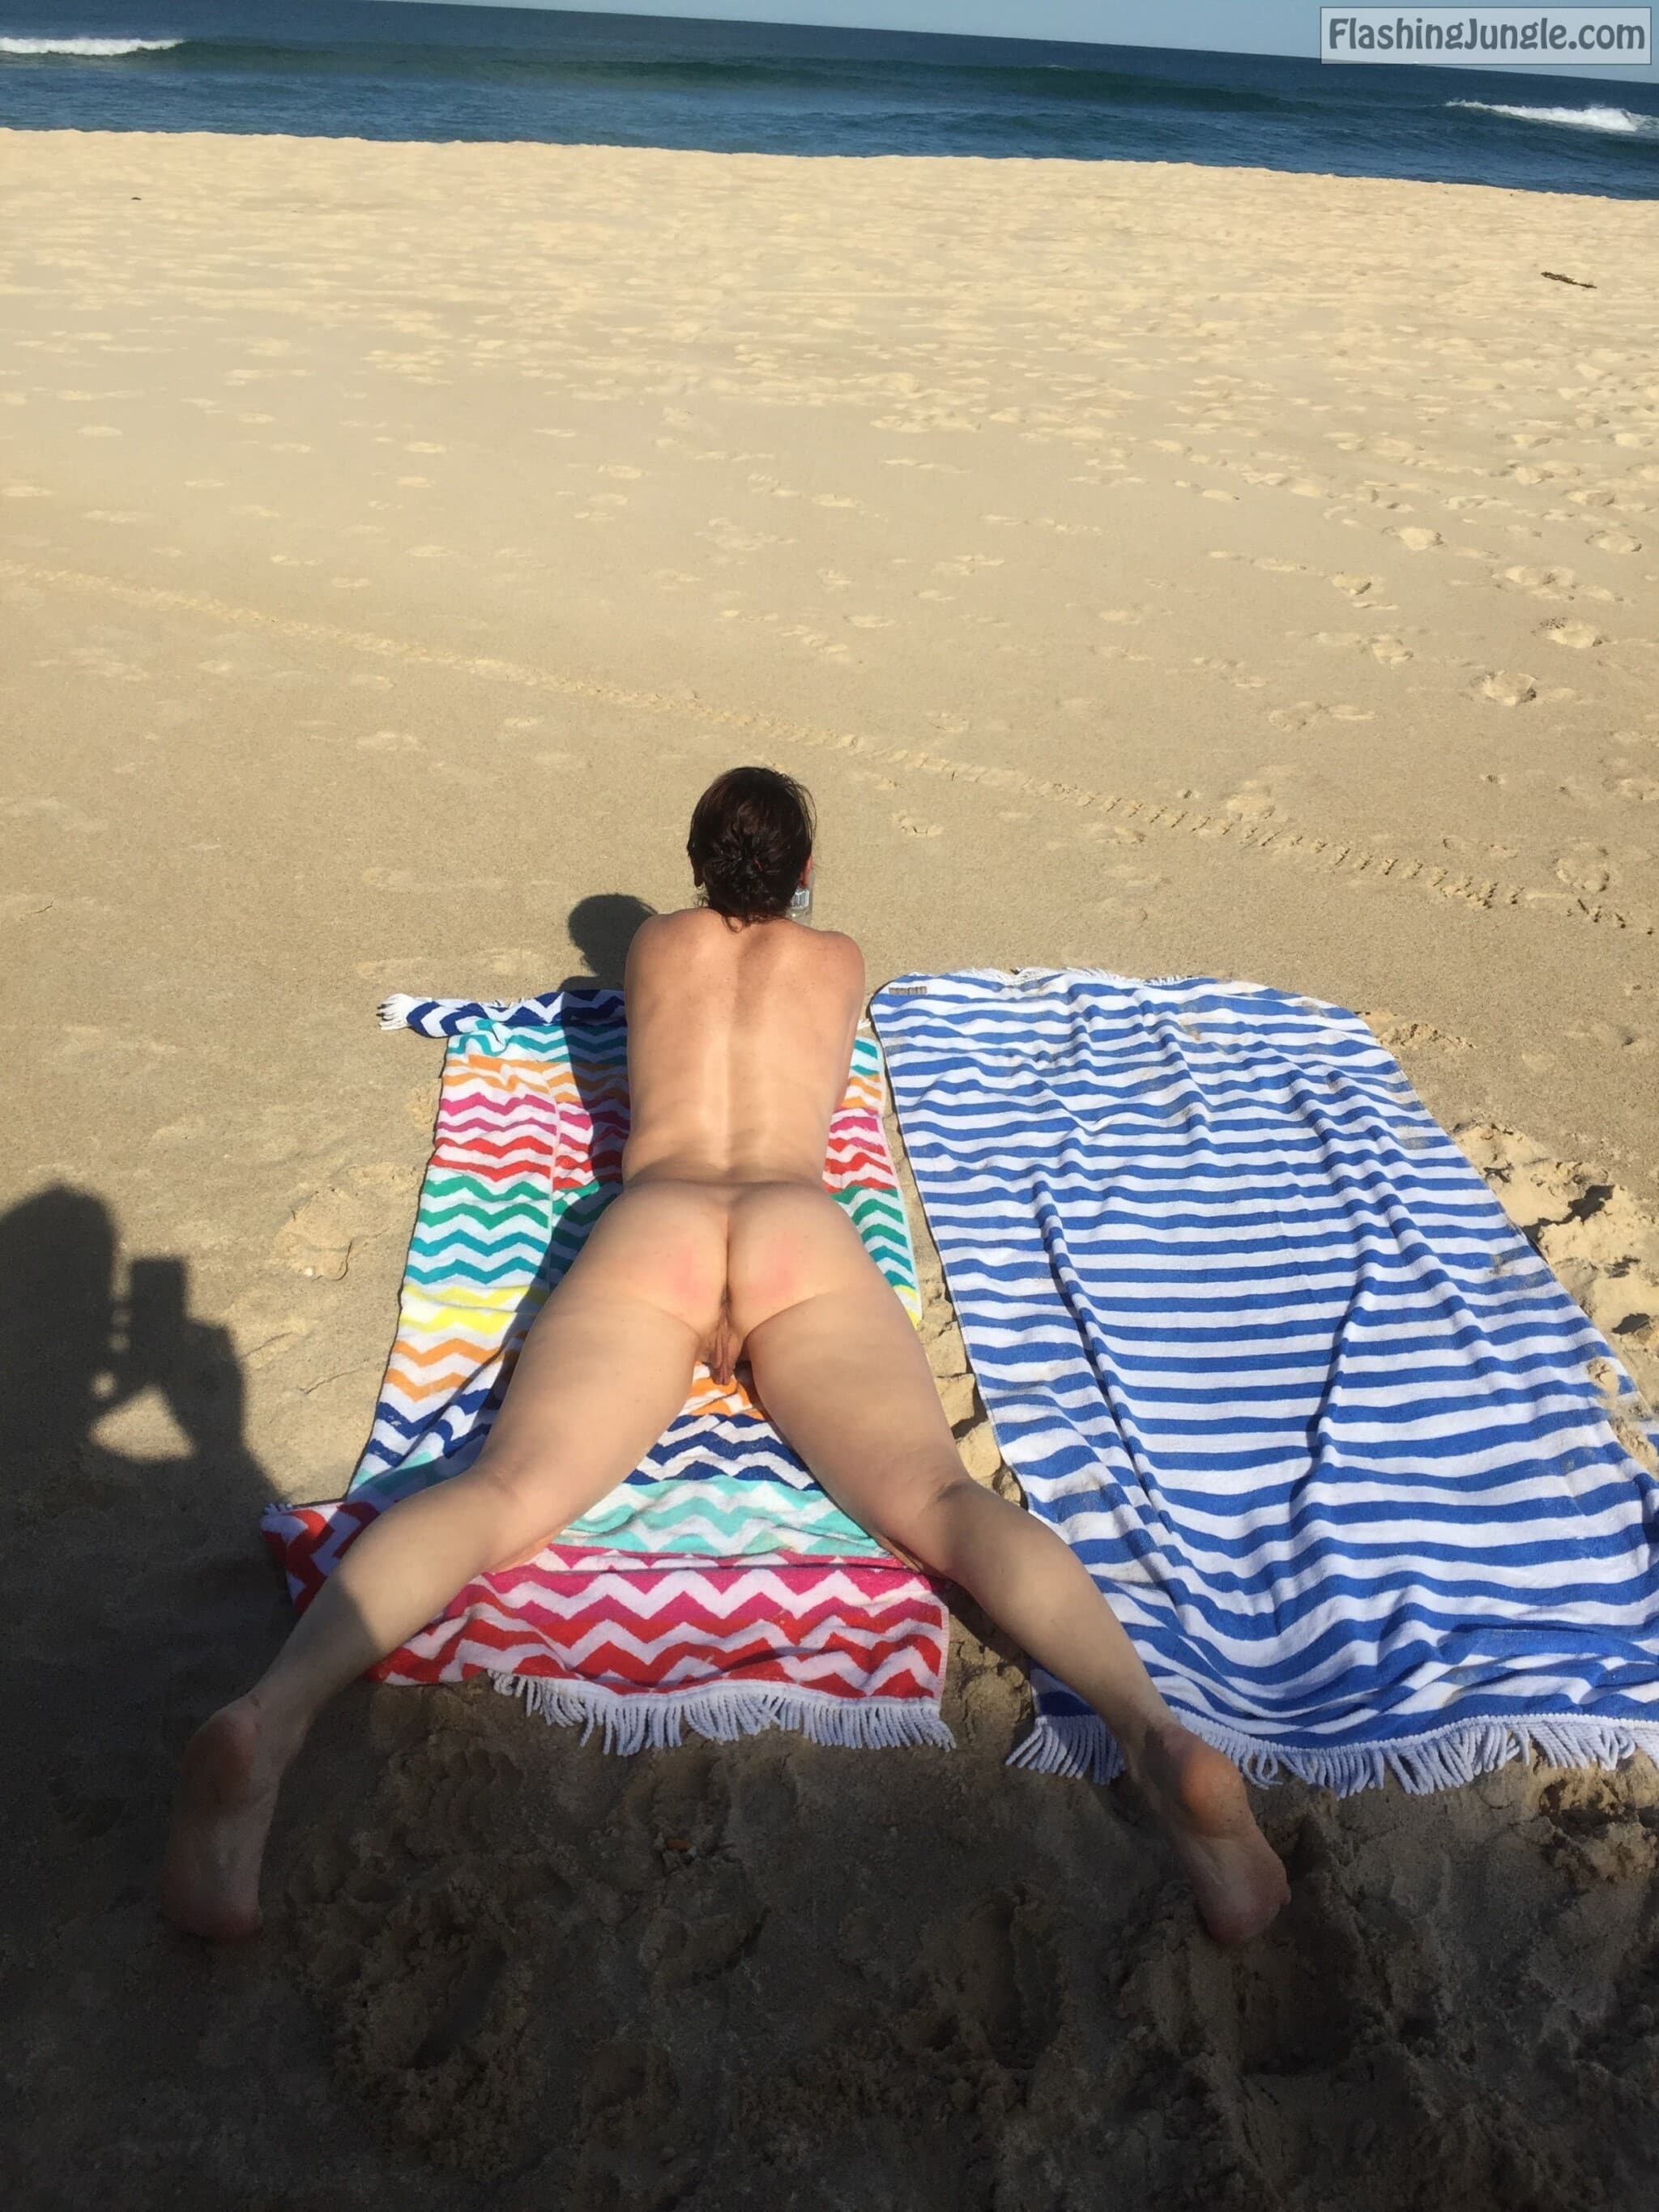 Hotwife Pics: Sharing nude wife on public beach Wife with very sexy slim body is laying on a public beach while hubby is taking photos of her fuckable ass and pussy. nude wife beach pics wife beach nude pics